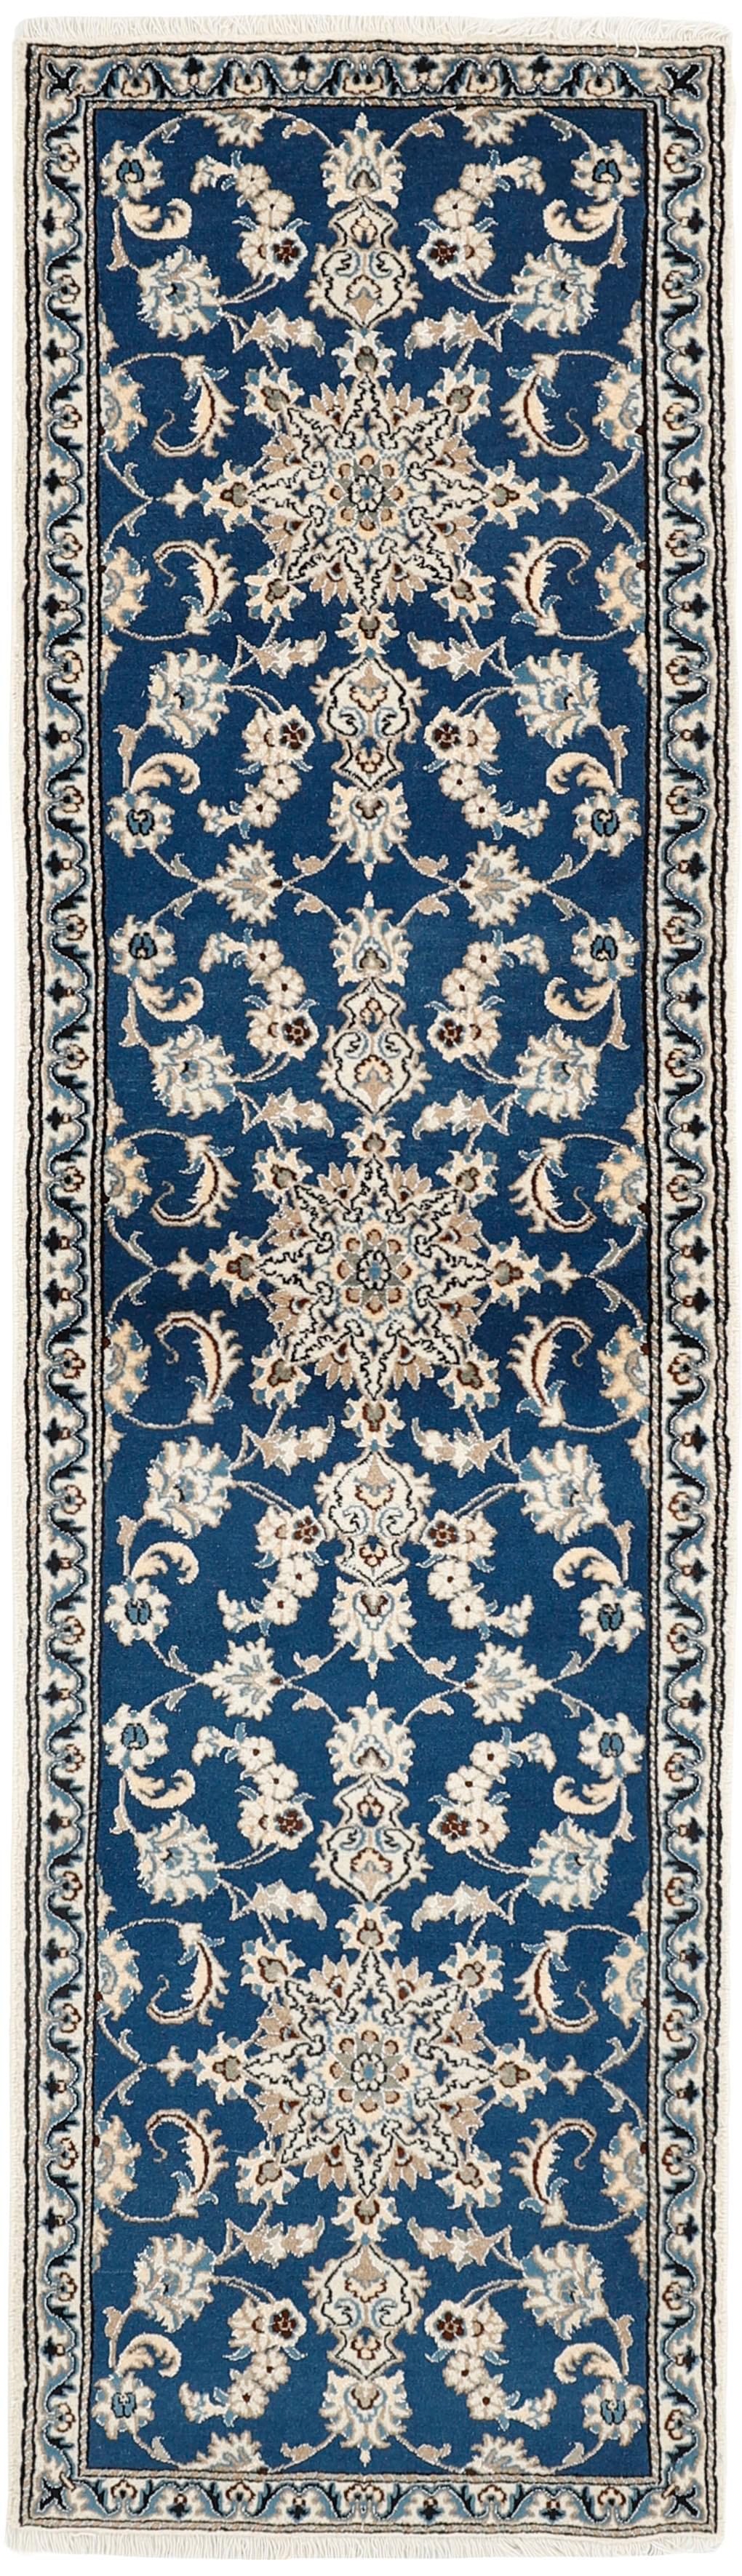 authentic persian runner with blue and beige floral design